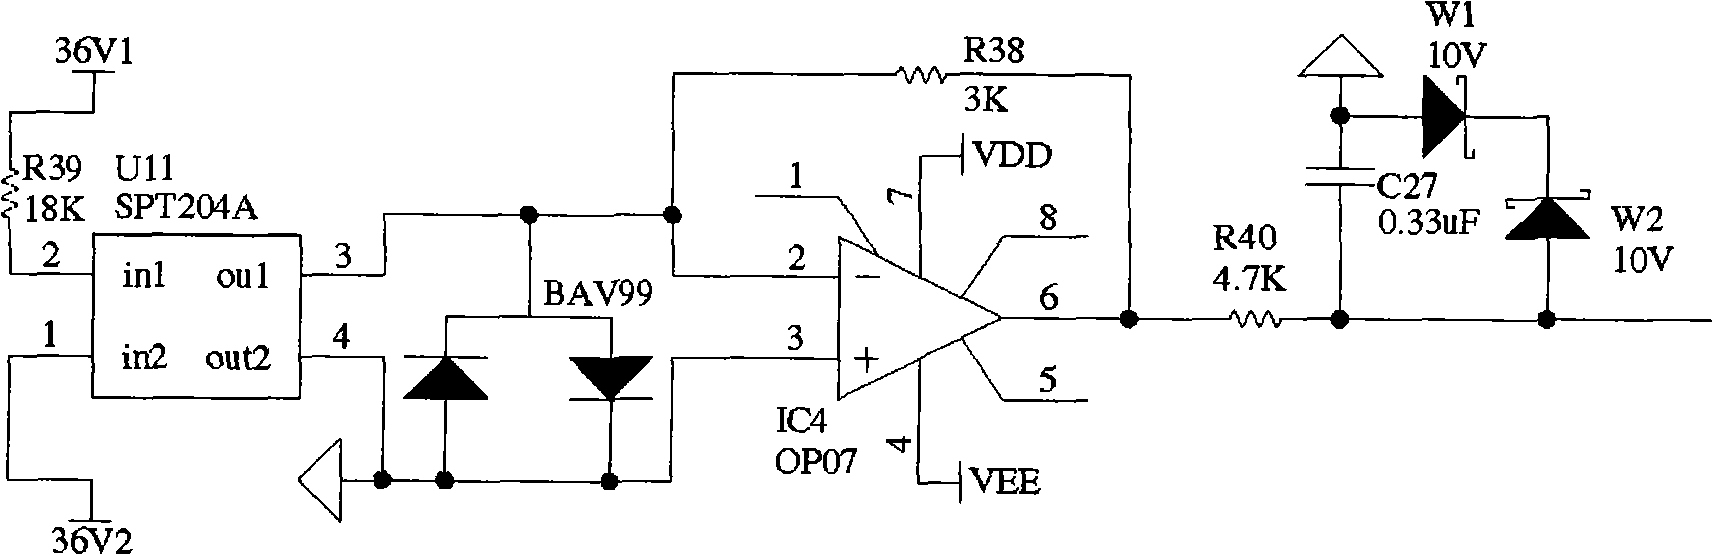 Novel duplicate-power double-fan intelligent monitoring protection device